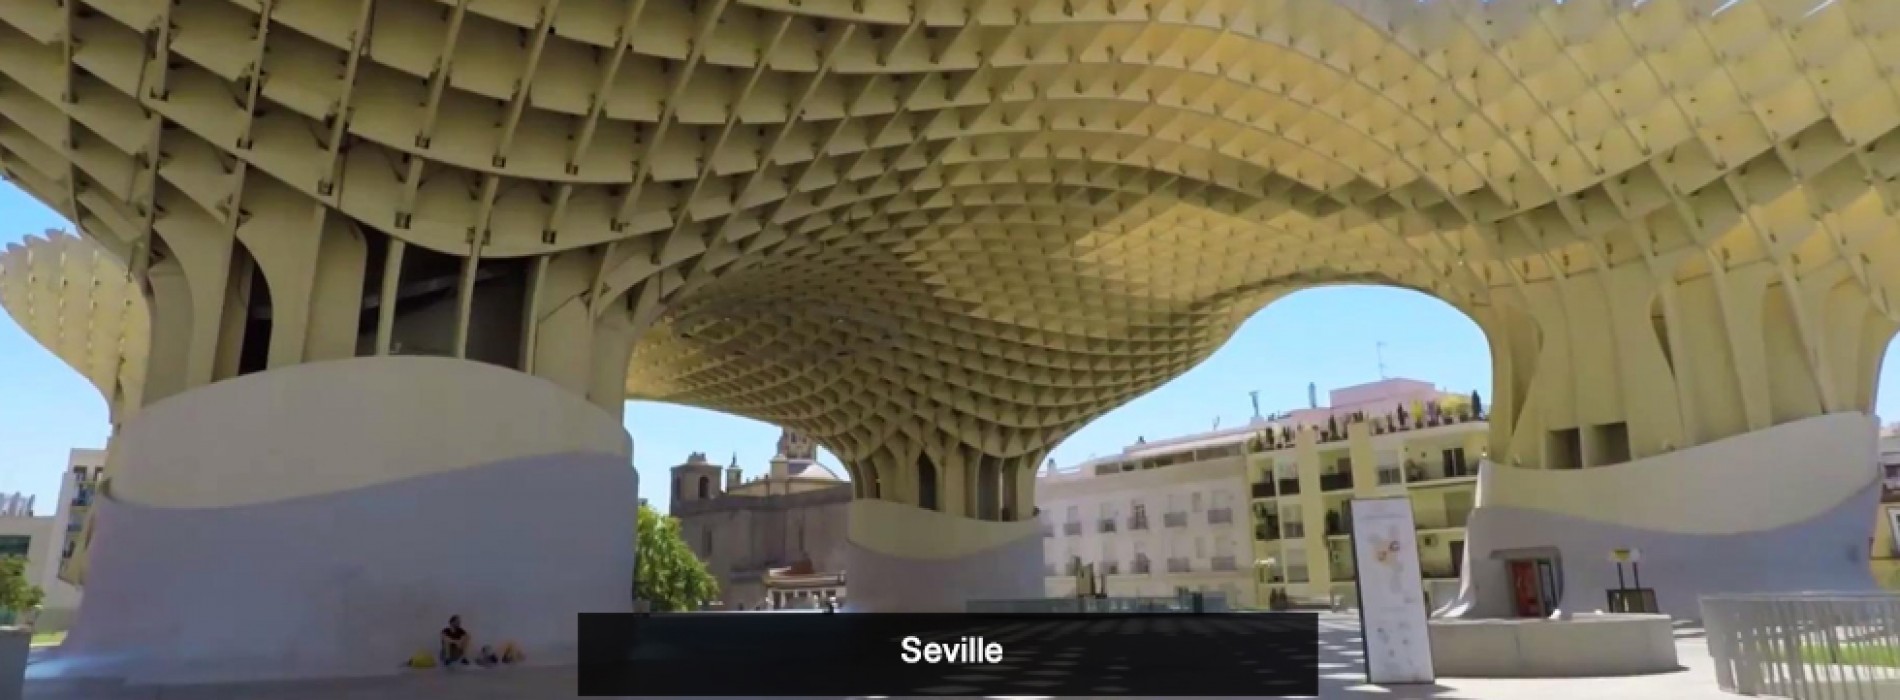 Seville – The best city for travel in 2018 by Lonely Planet